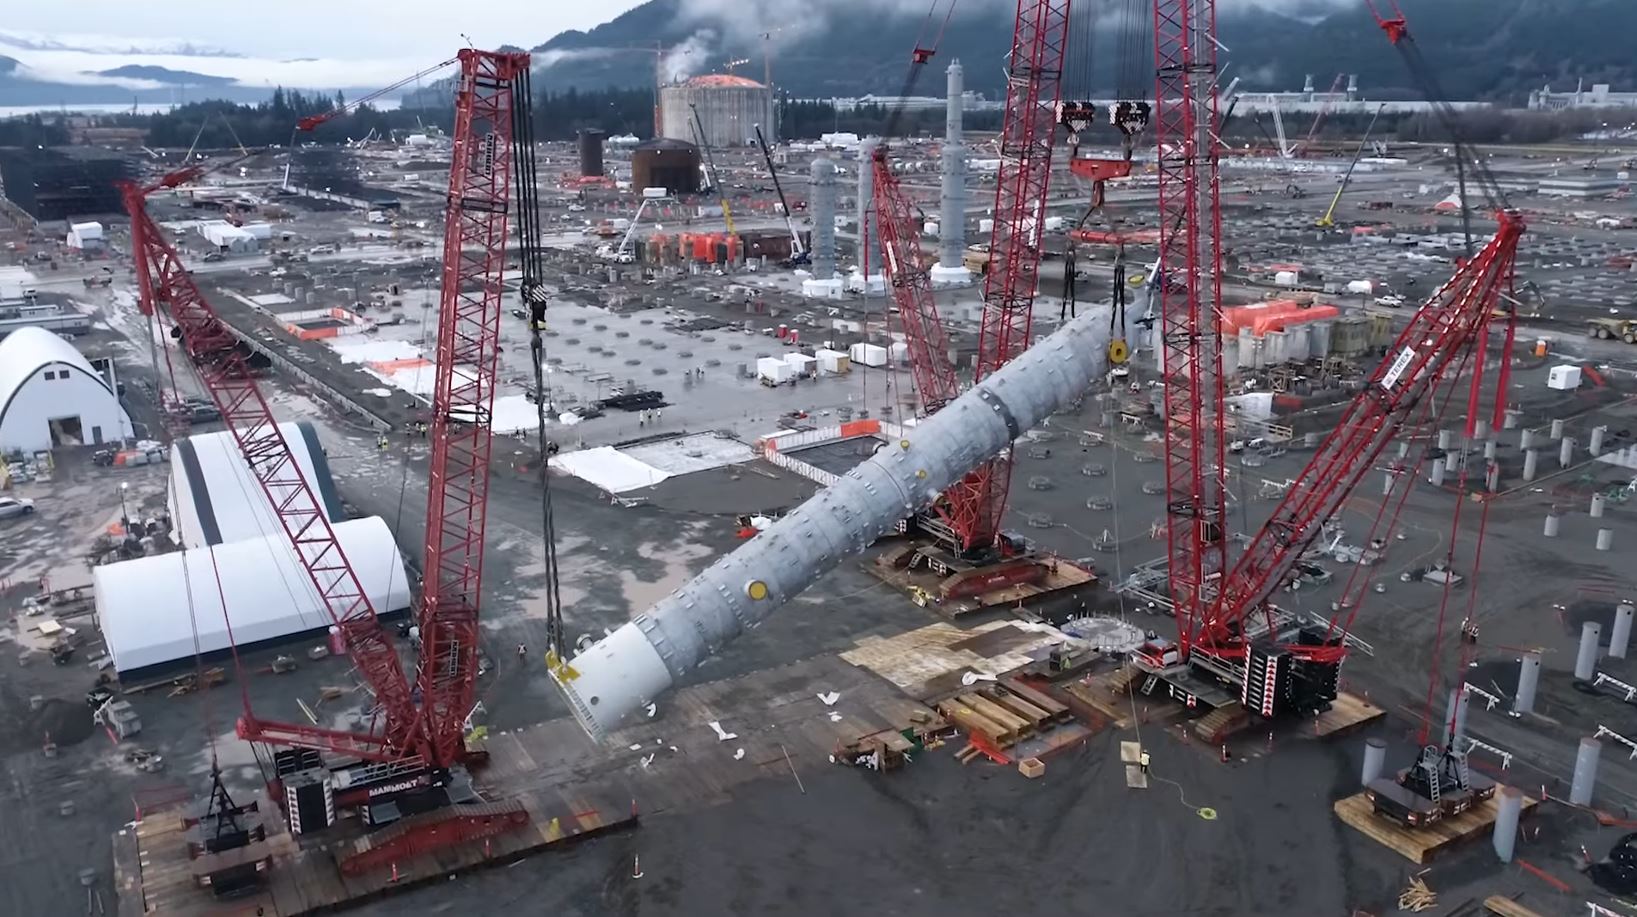 Video LNG Canada lifts main absorber